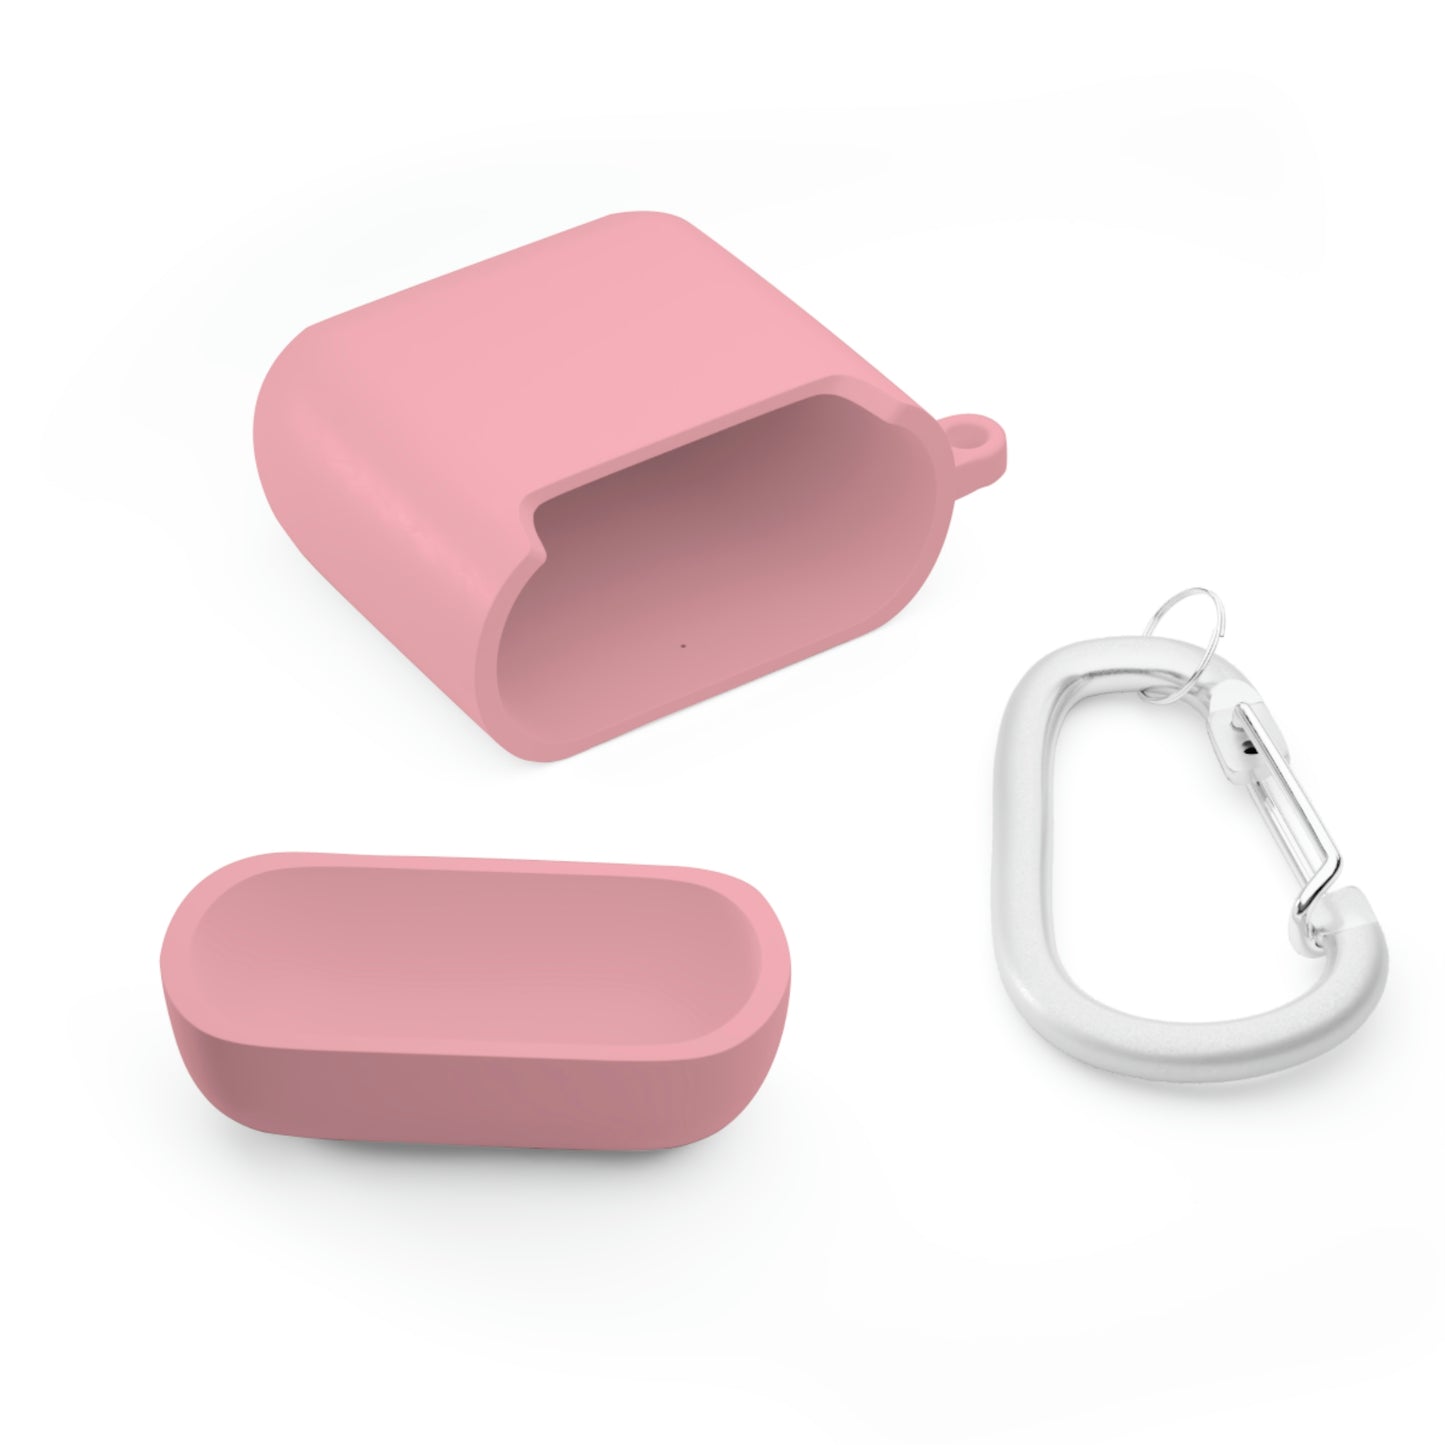 Fought For & Redeemed AirPods / Airpods Pro Case cover